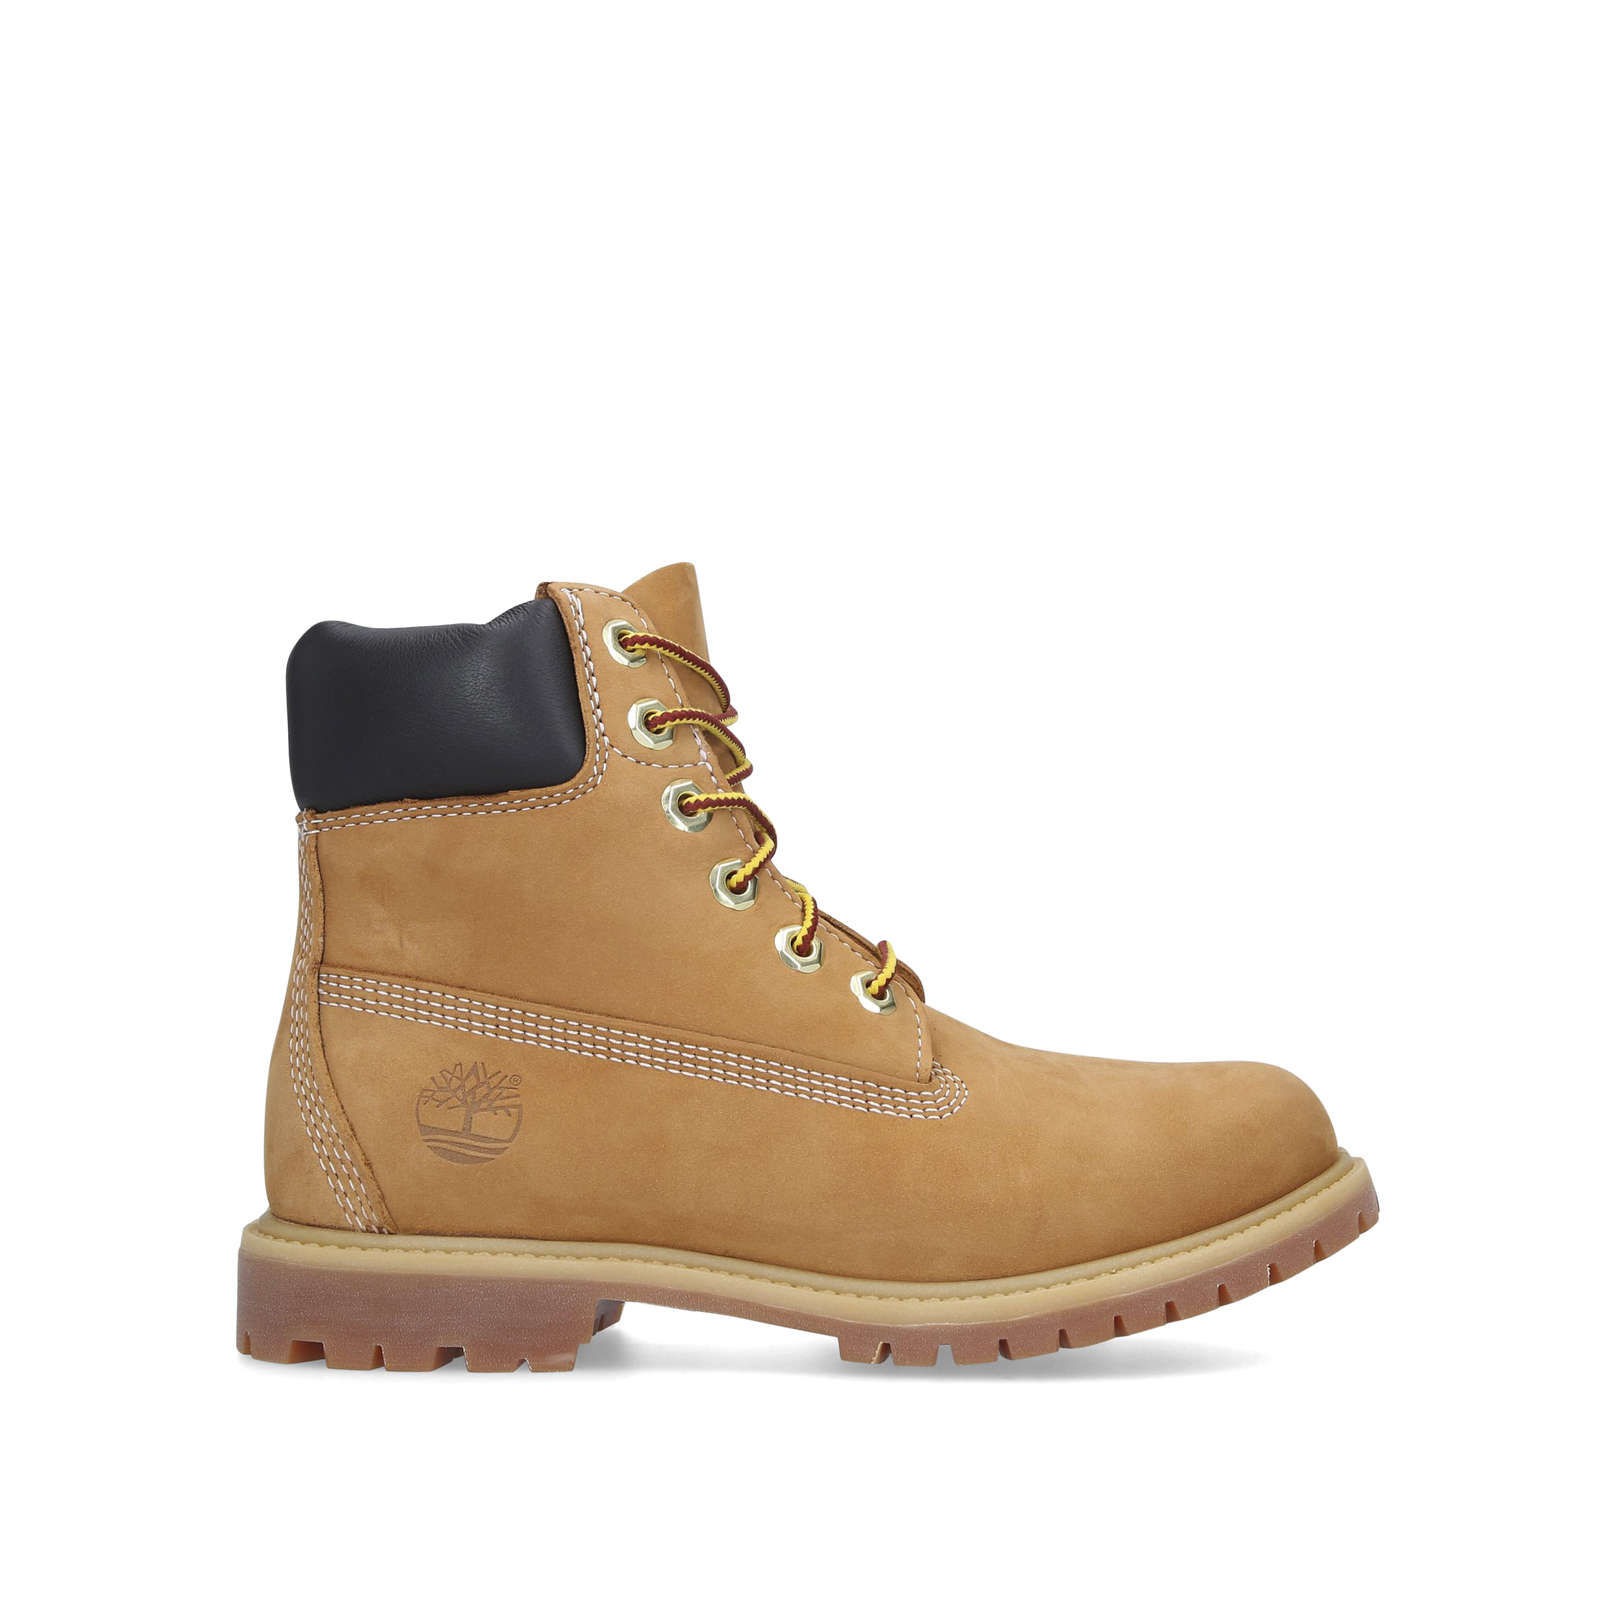 6IN PREMIUM BOOT - WP - TIMBERLAND Ankle Boots